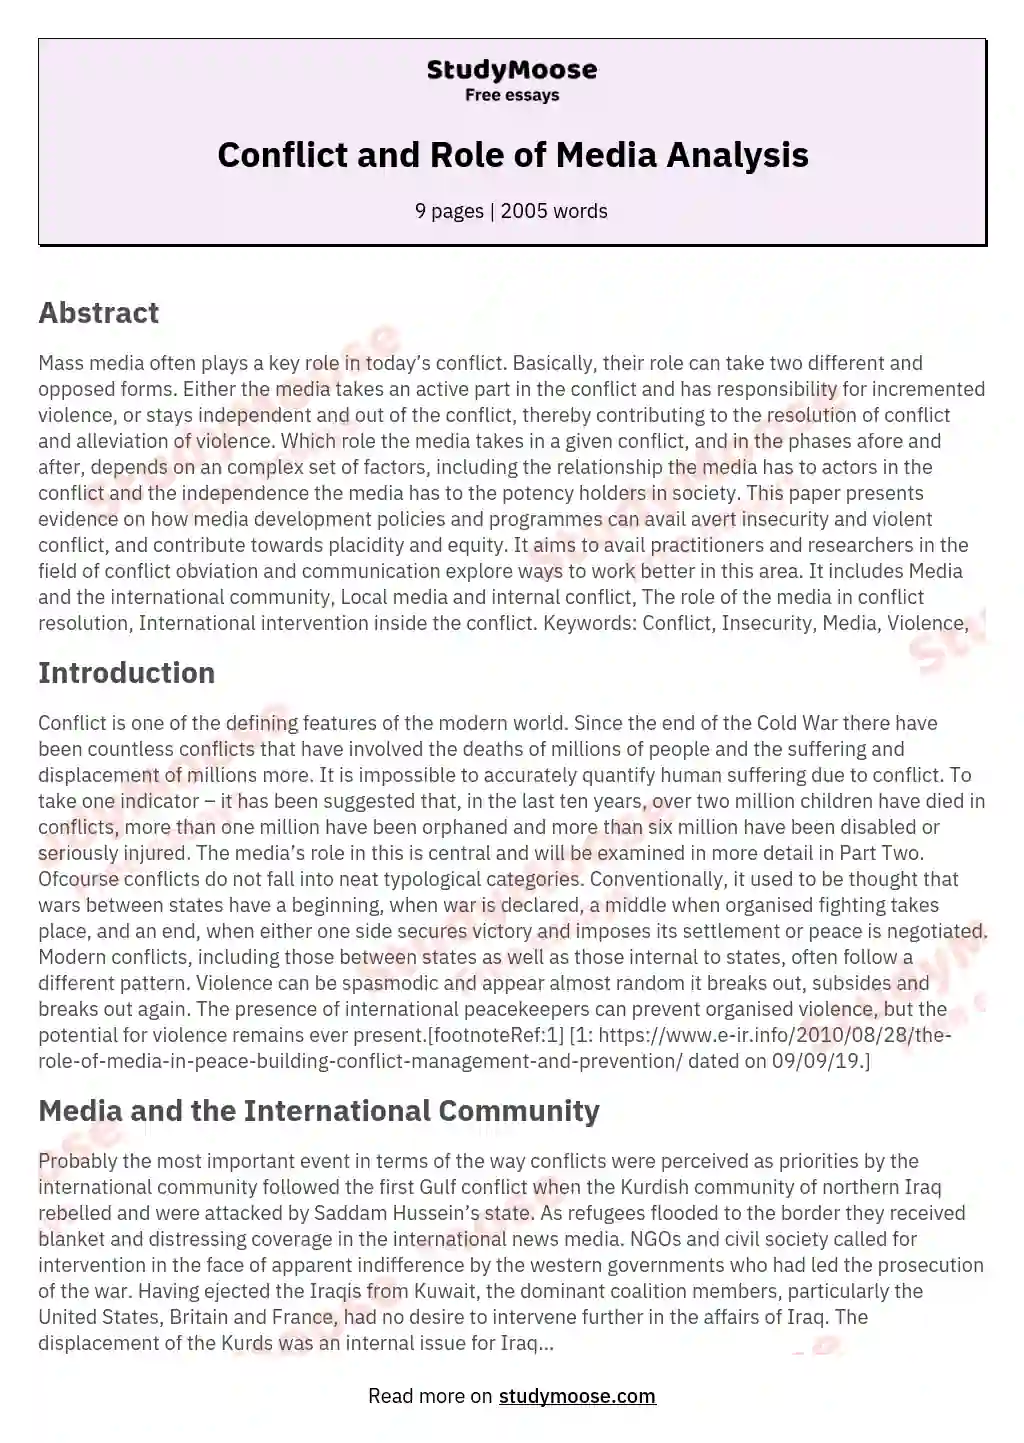 Conflict and Role of Media Analysis essay